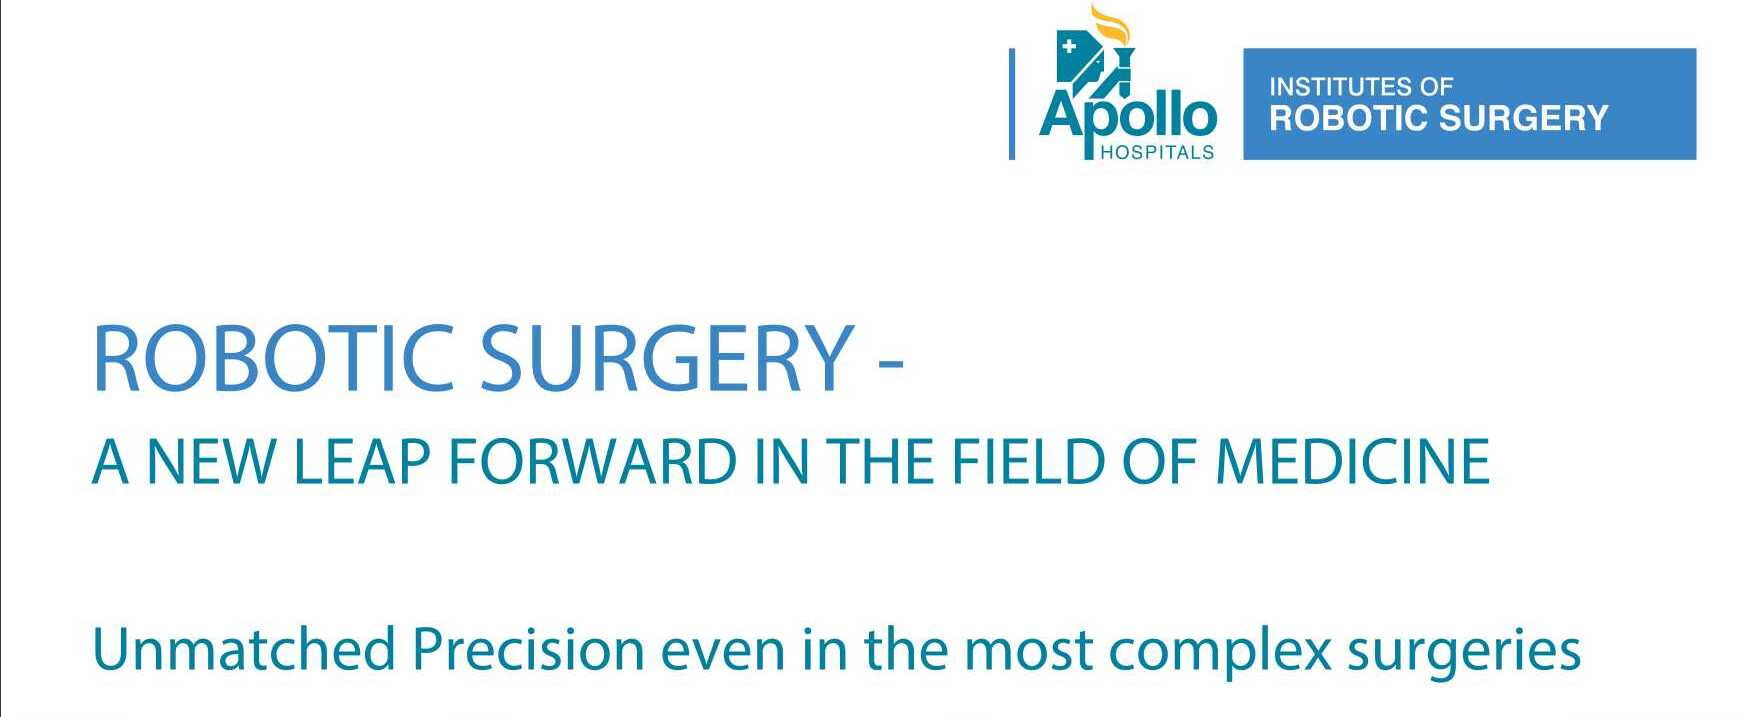 What is robotic surgery